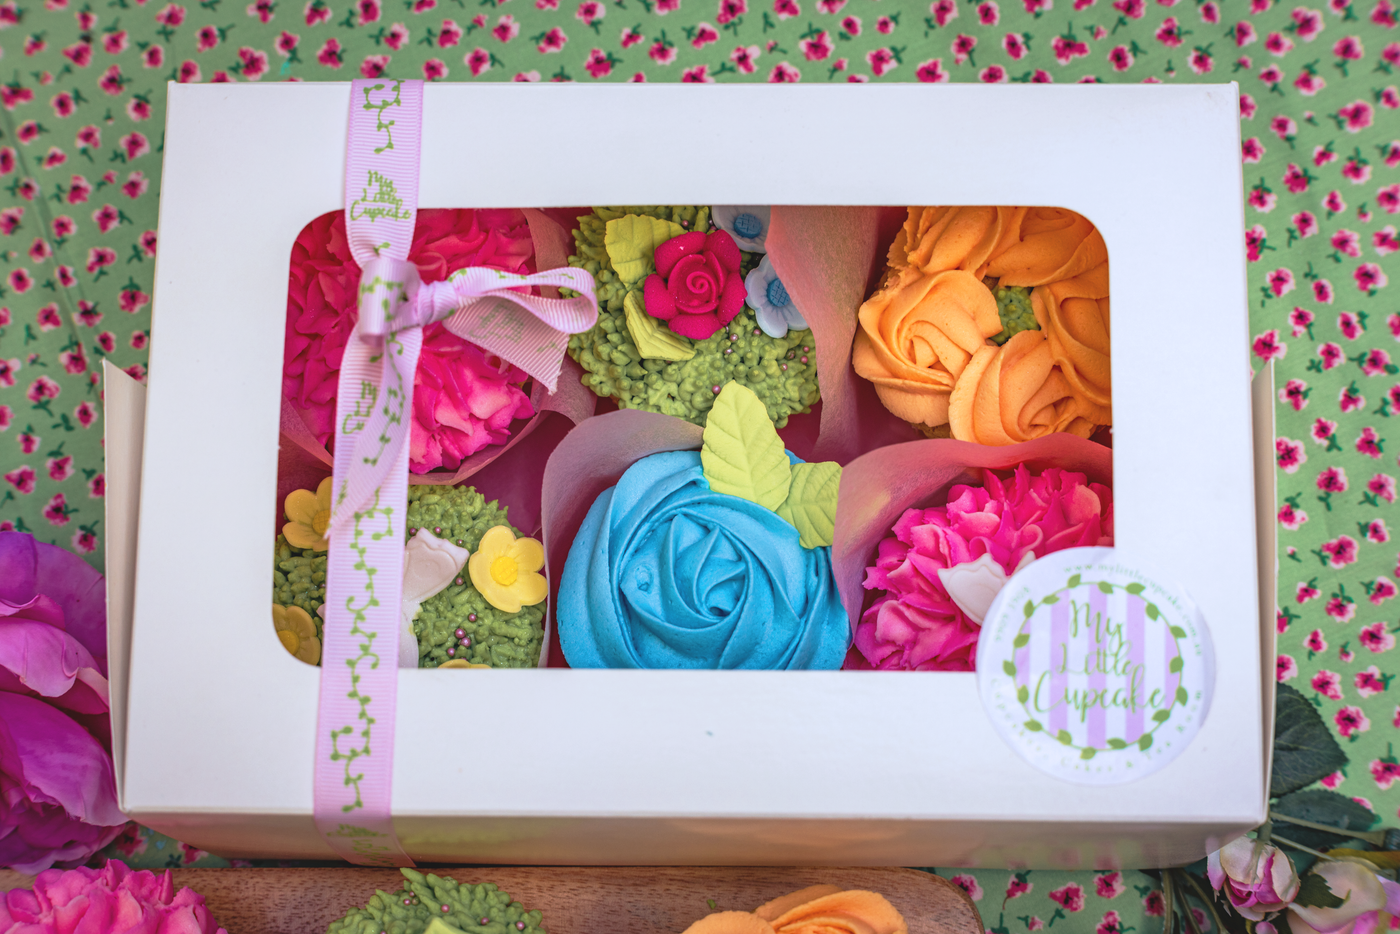 Mothers Day Bouquet Cupcakes